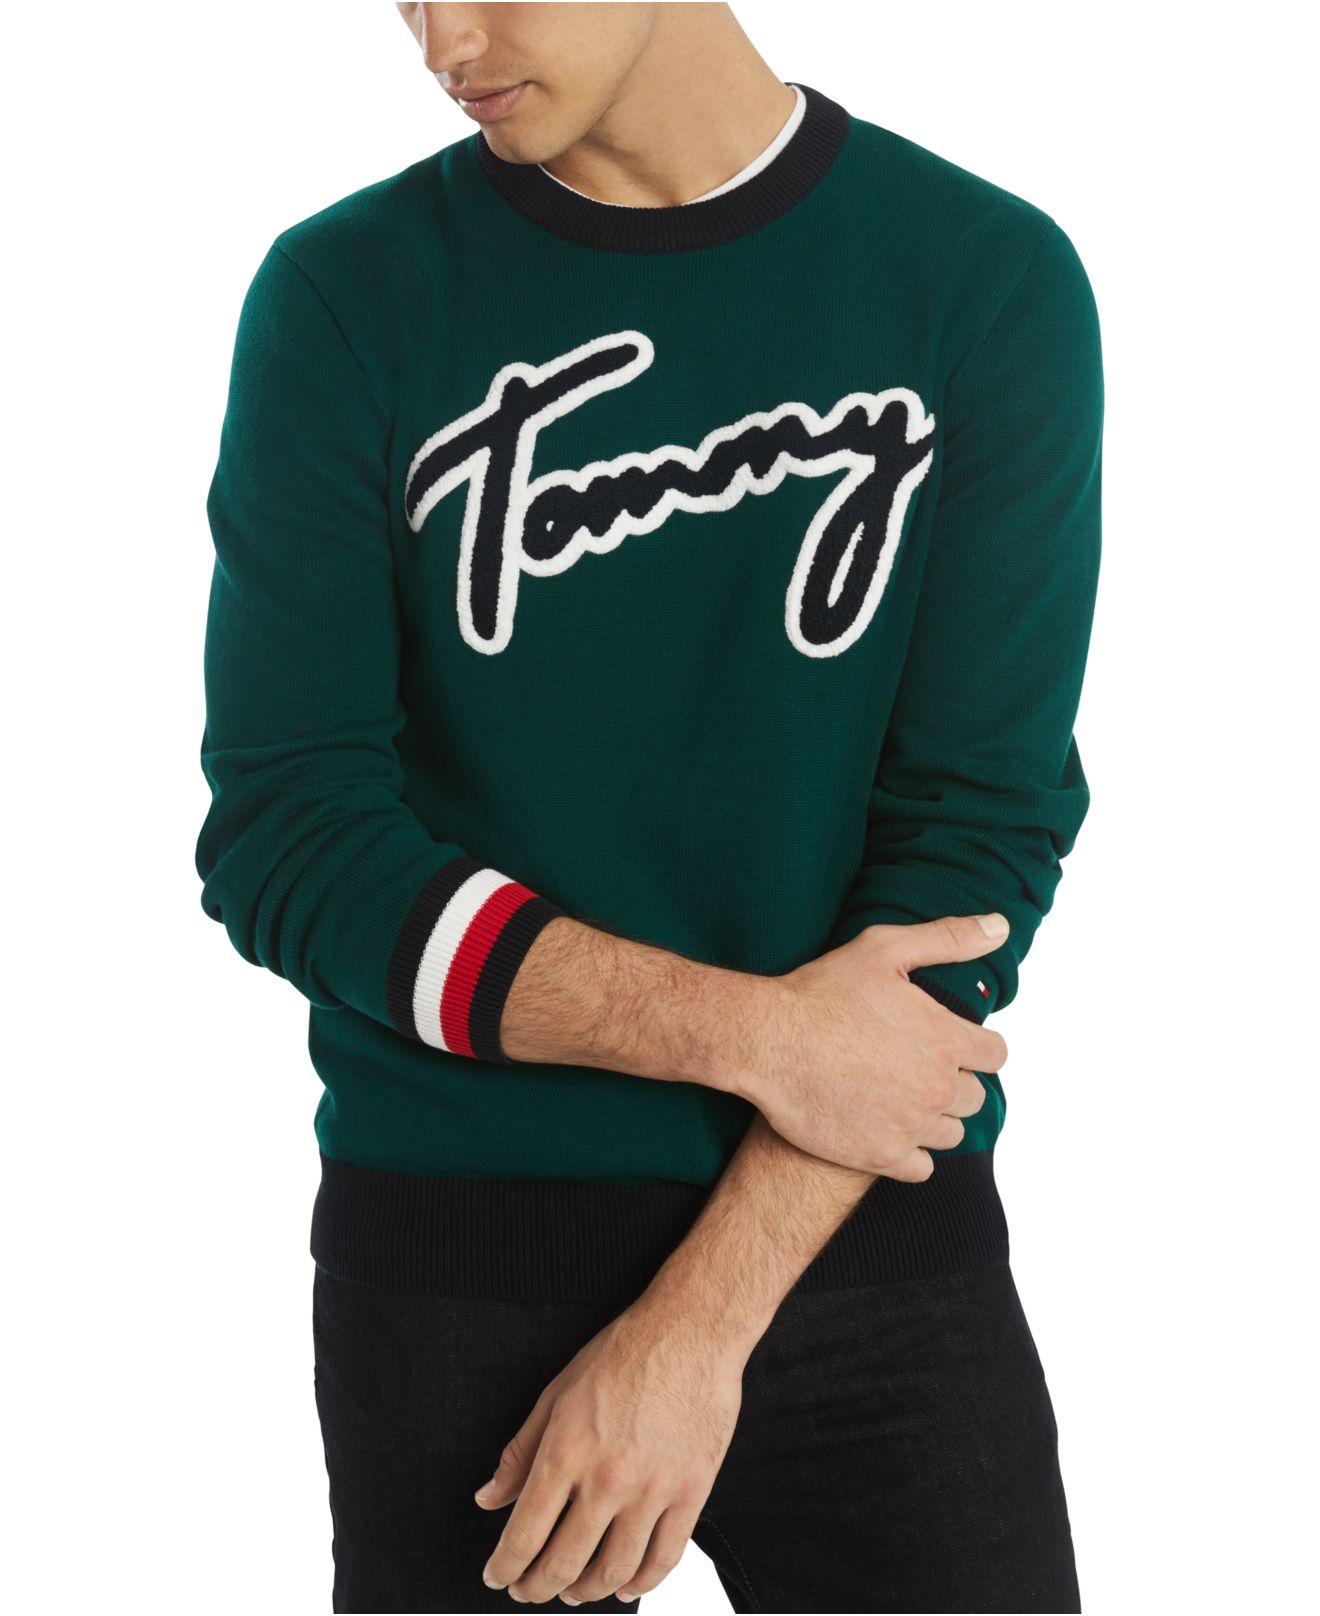 tommy hilfiger sweater green